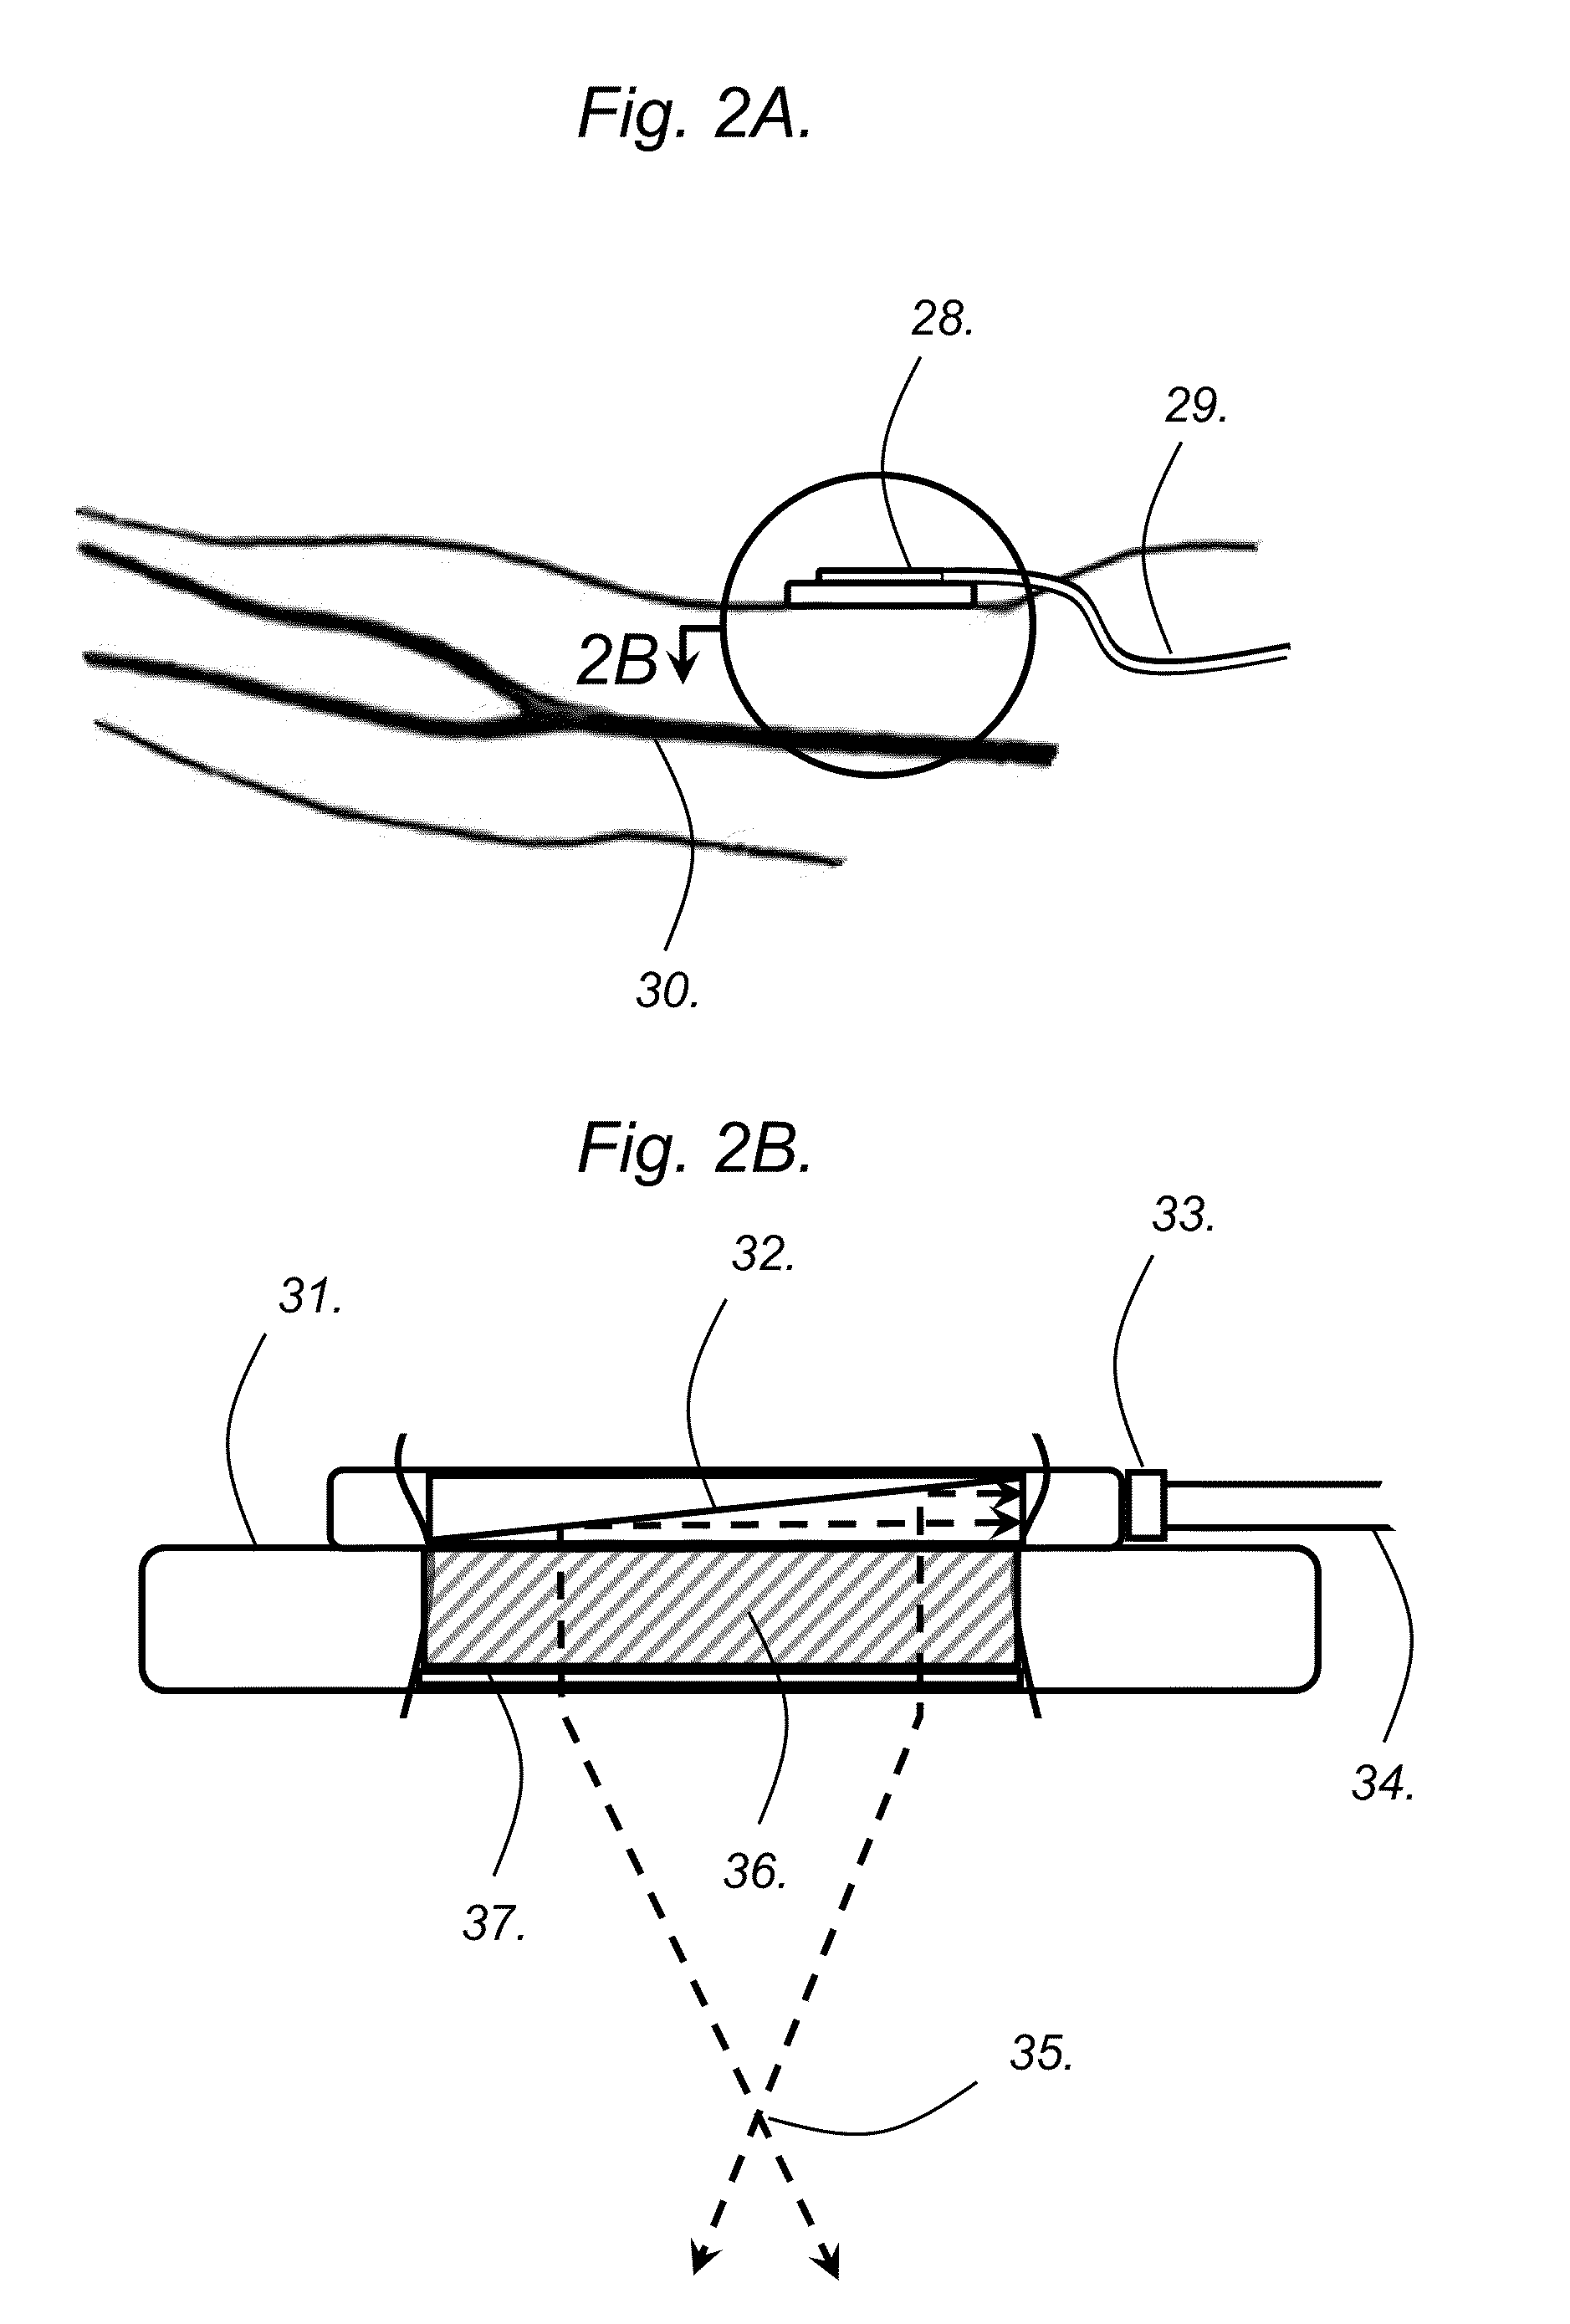 Continuous, non-invasive, optical blood pressure monitoring system